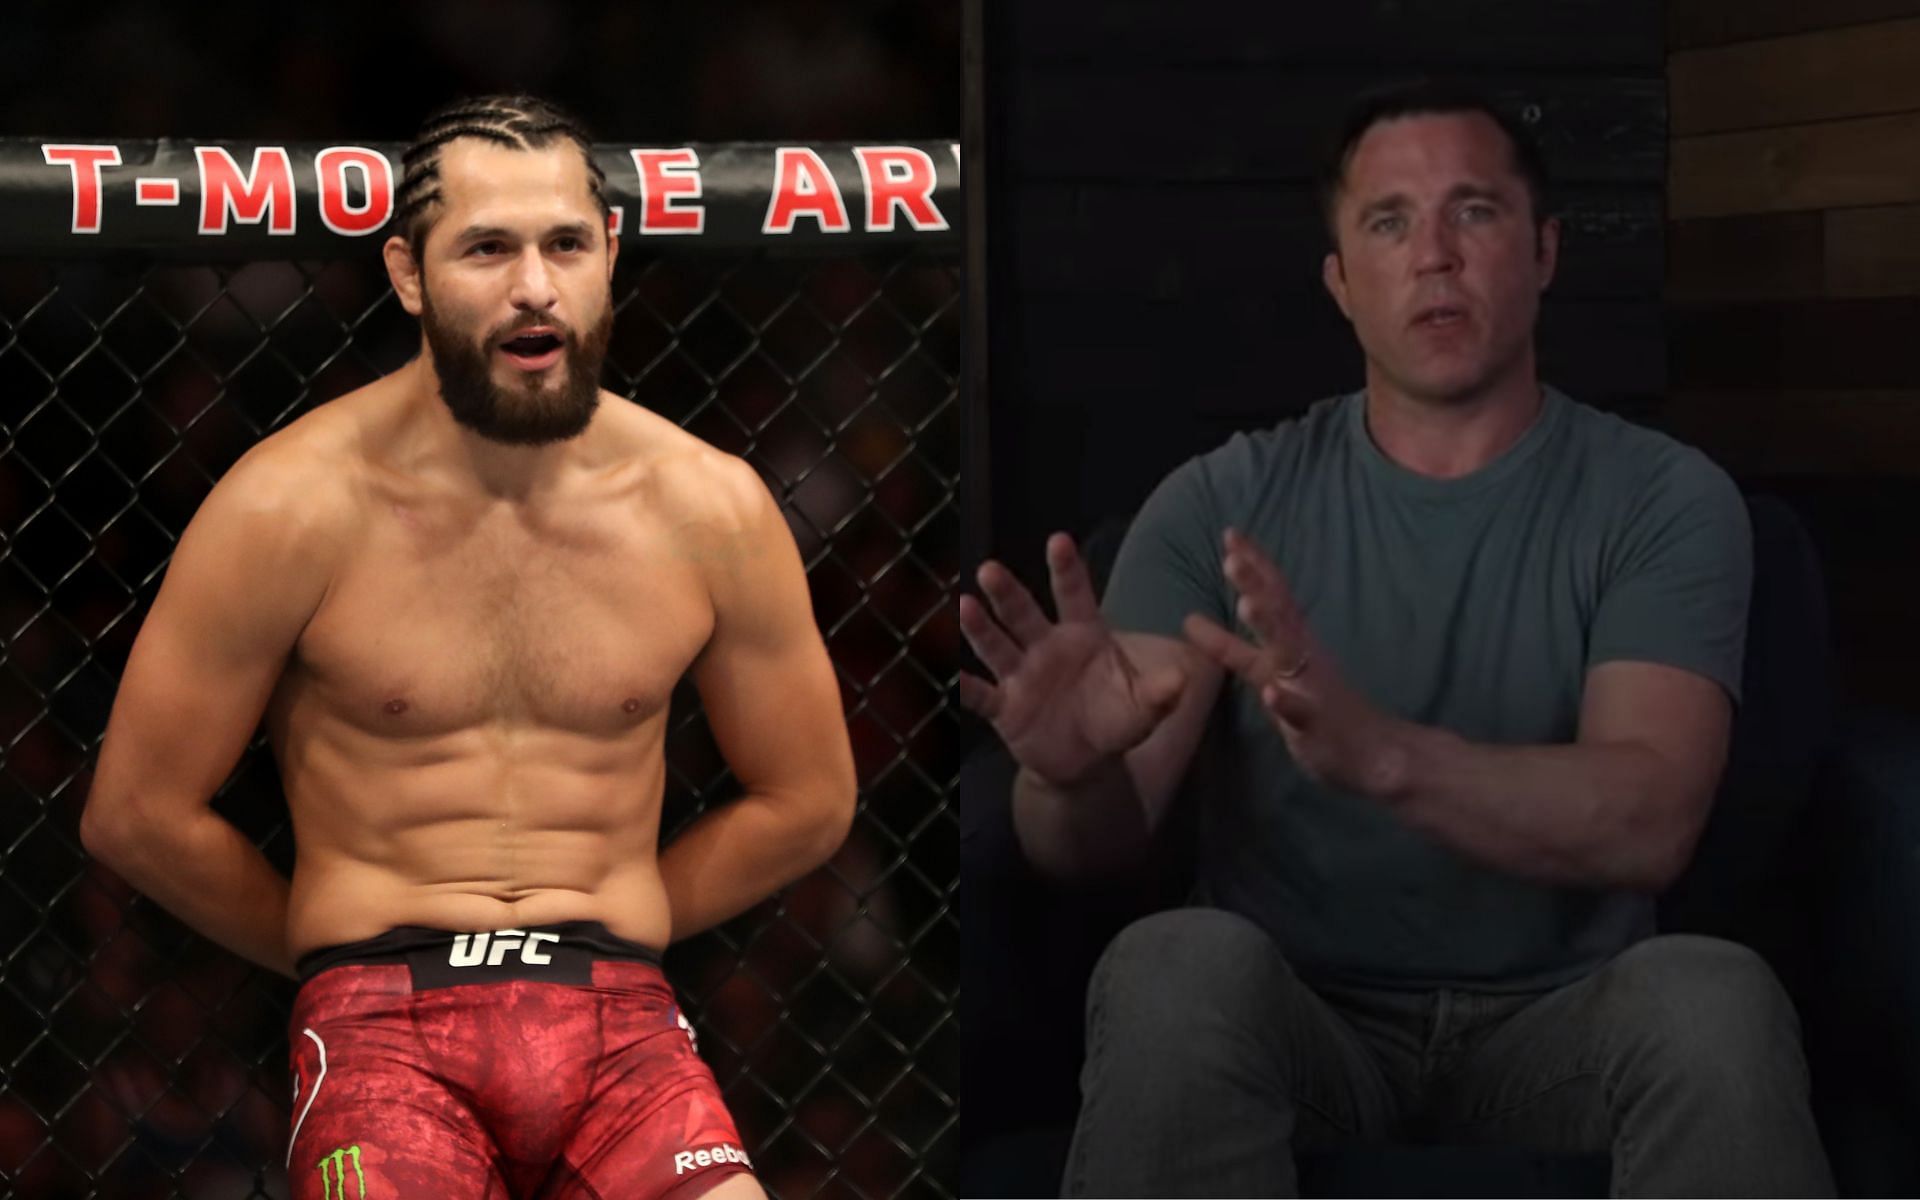 Jorge Masvidal (left, image courtesy of Getty); Chael Sonnen (right, image courtesy of Chael Sonnen YouTube channel)